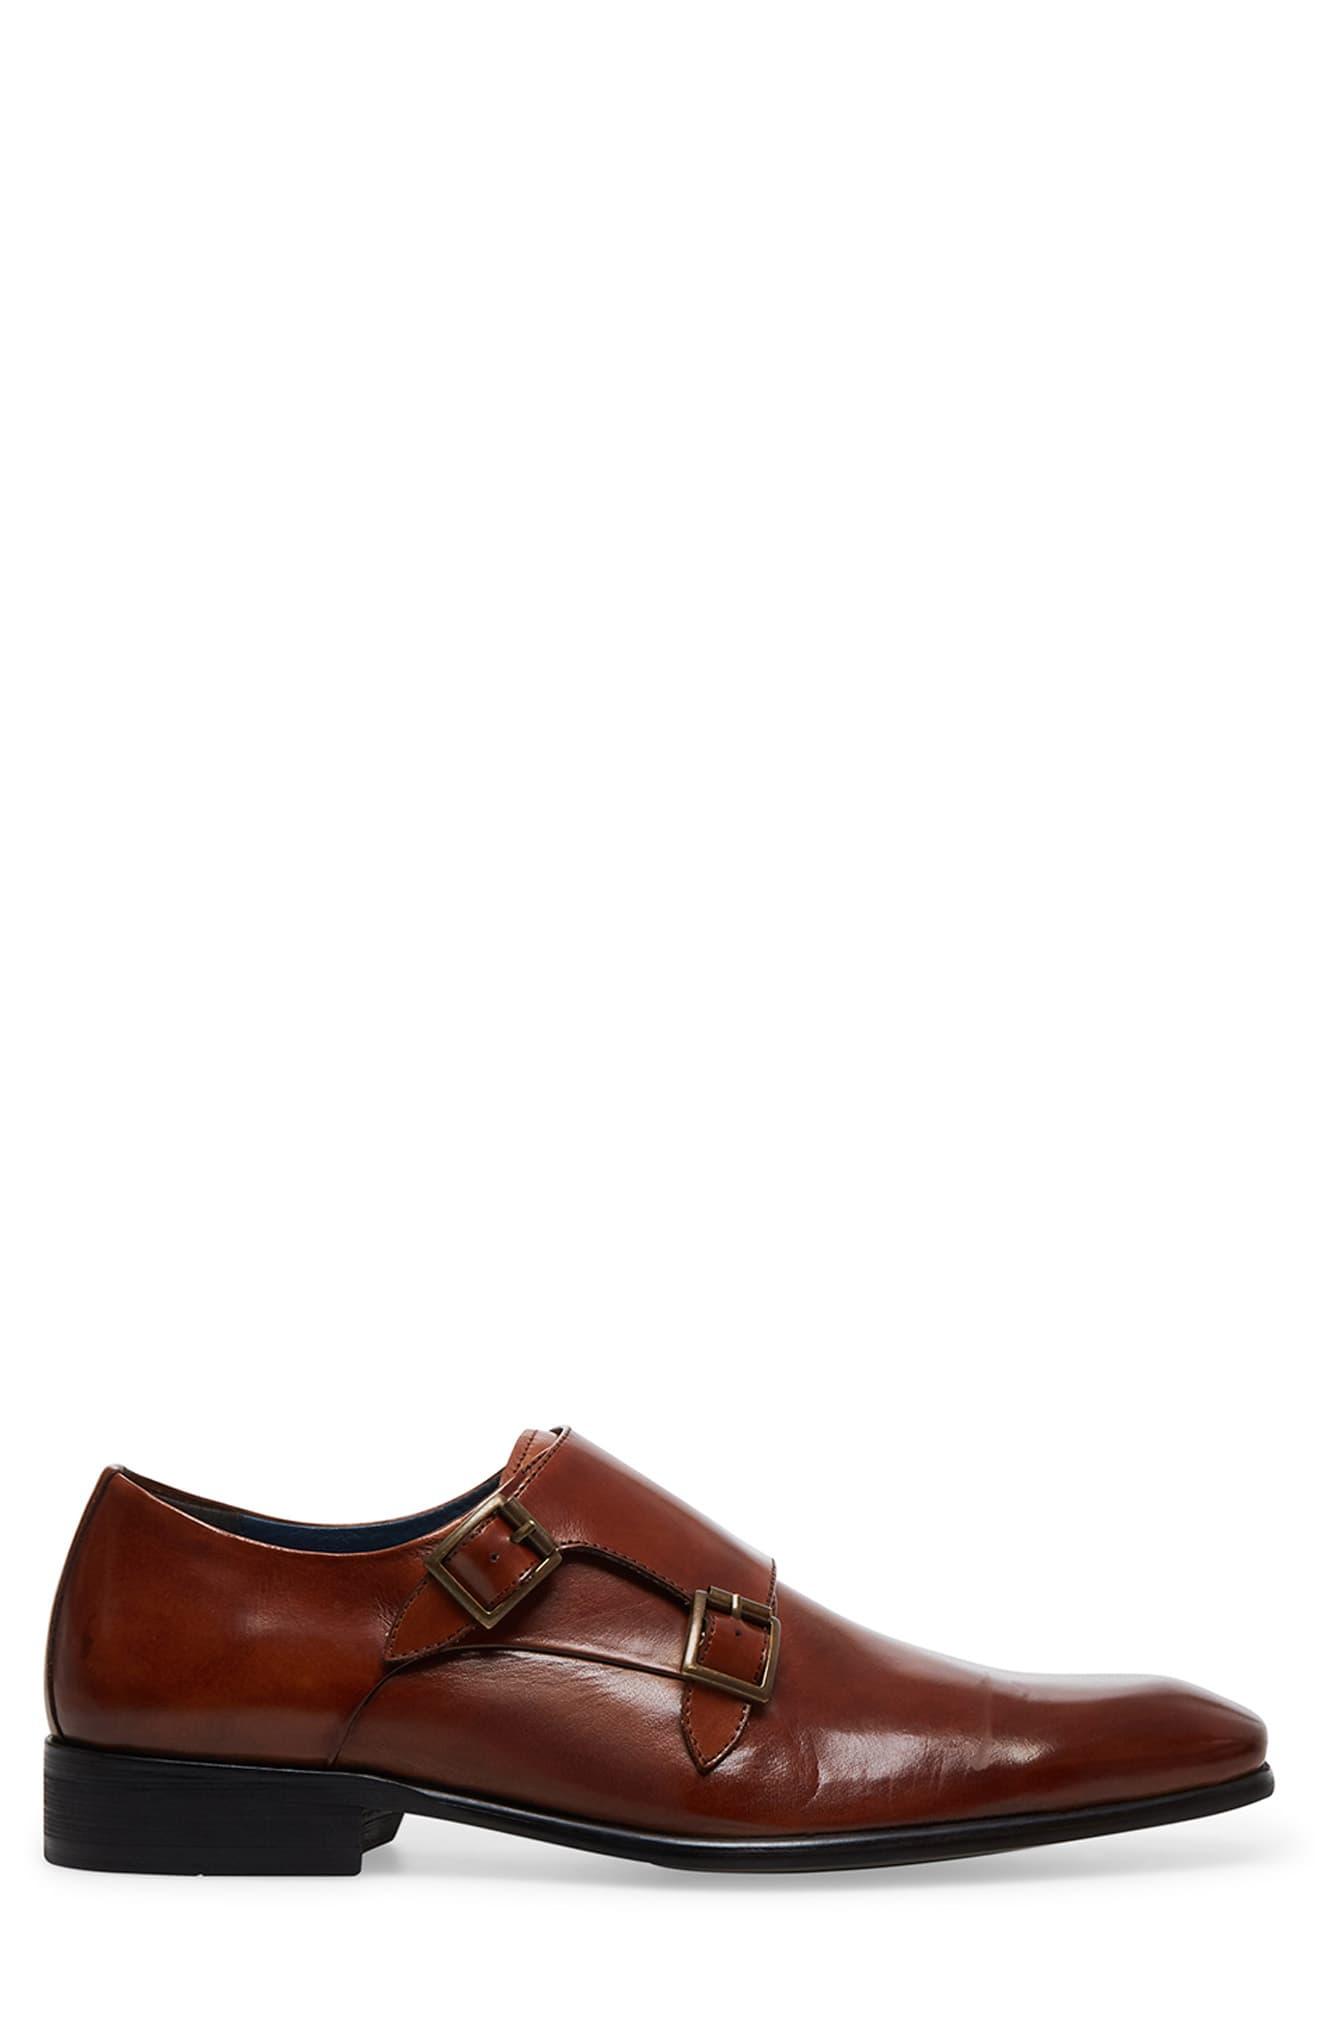 Steve Madden Leather Beaumont Double Monk Strap Shoe in Cognac Leather ...